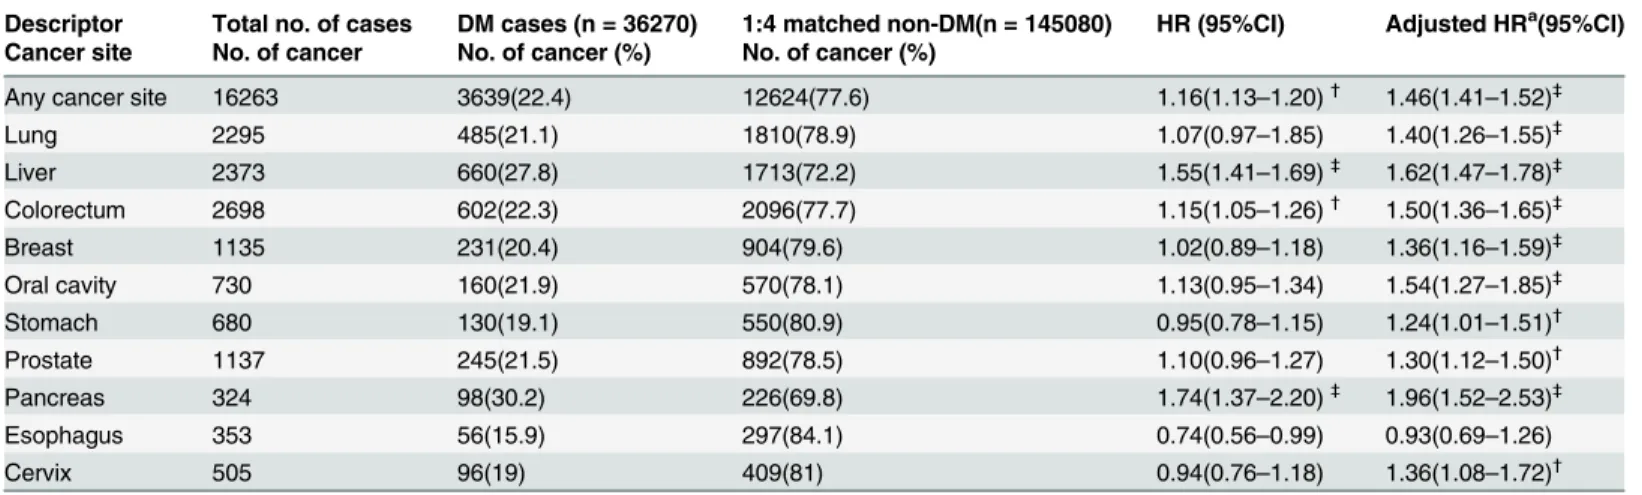 Table 2. The risk of cancer in subjects with and without DM.